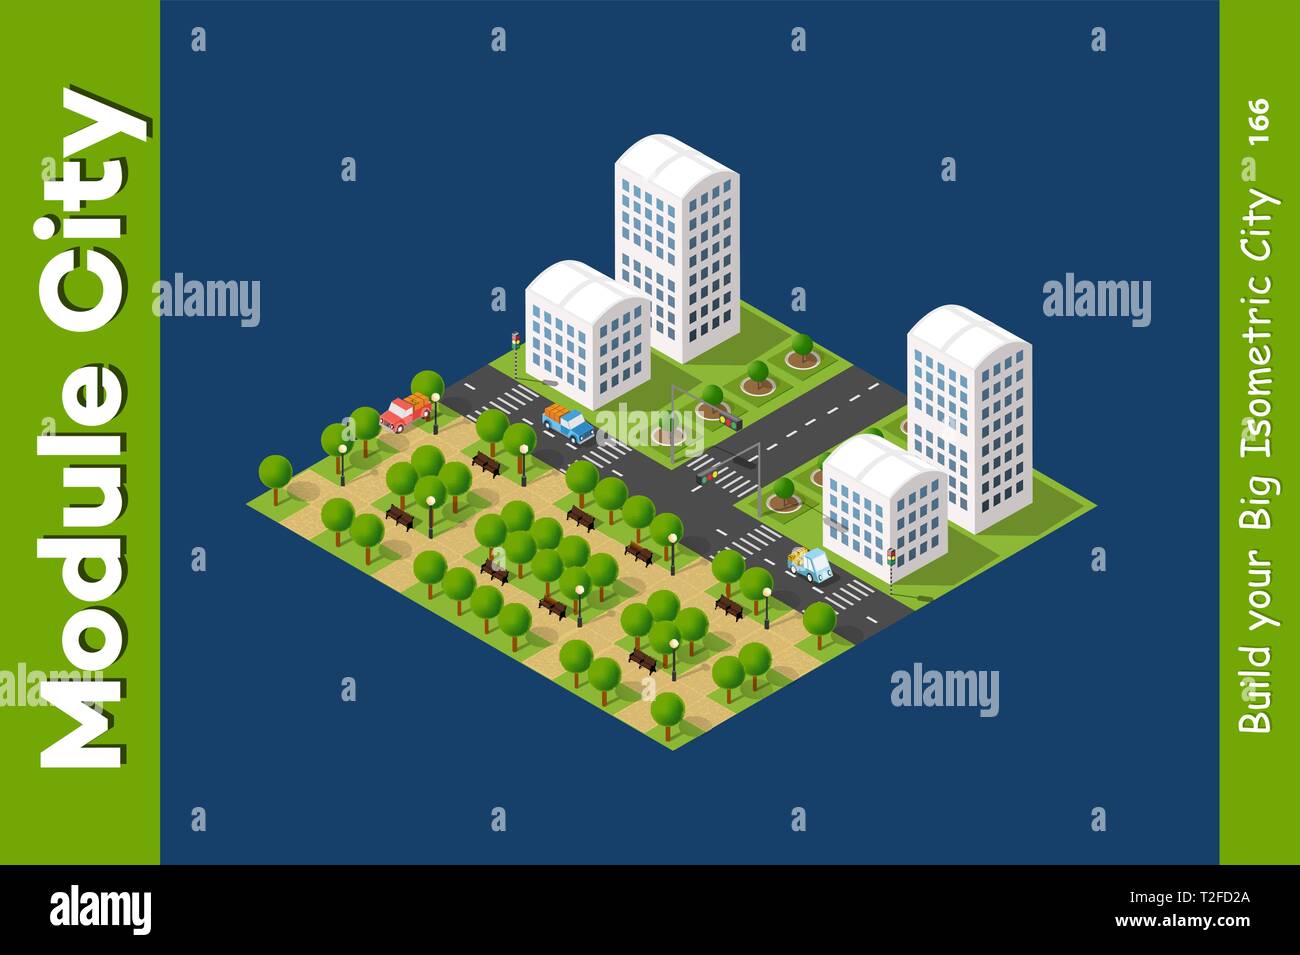 Vector isometric urban architecture building of the modern city with streets, skyscrapers, and town, houses. For business illustration and construction map s Stock Vector